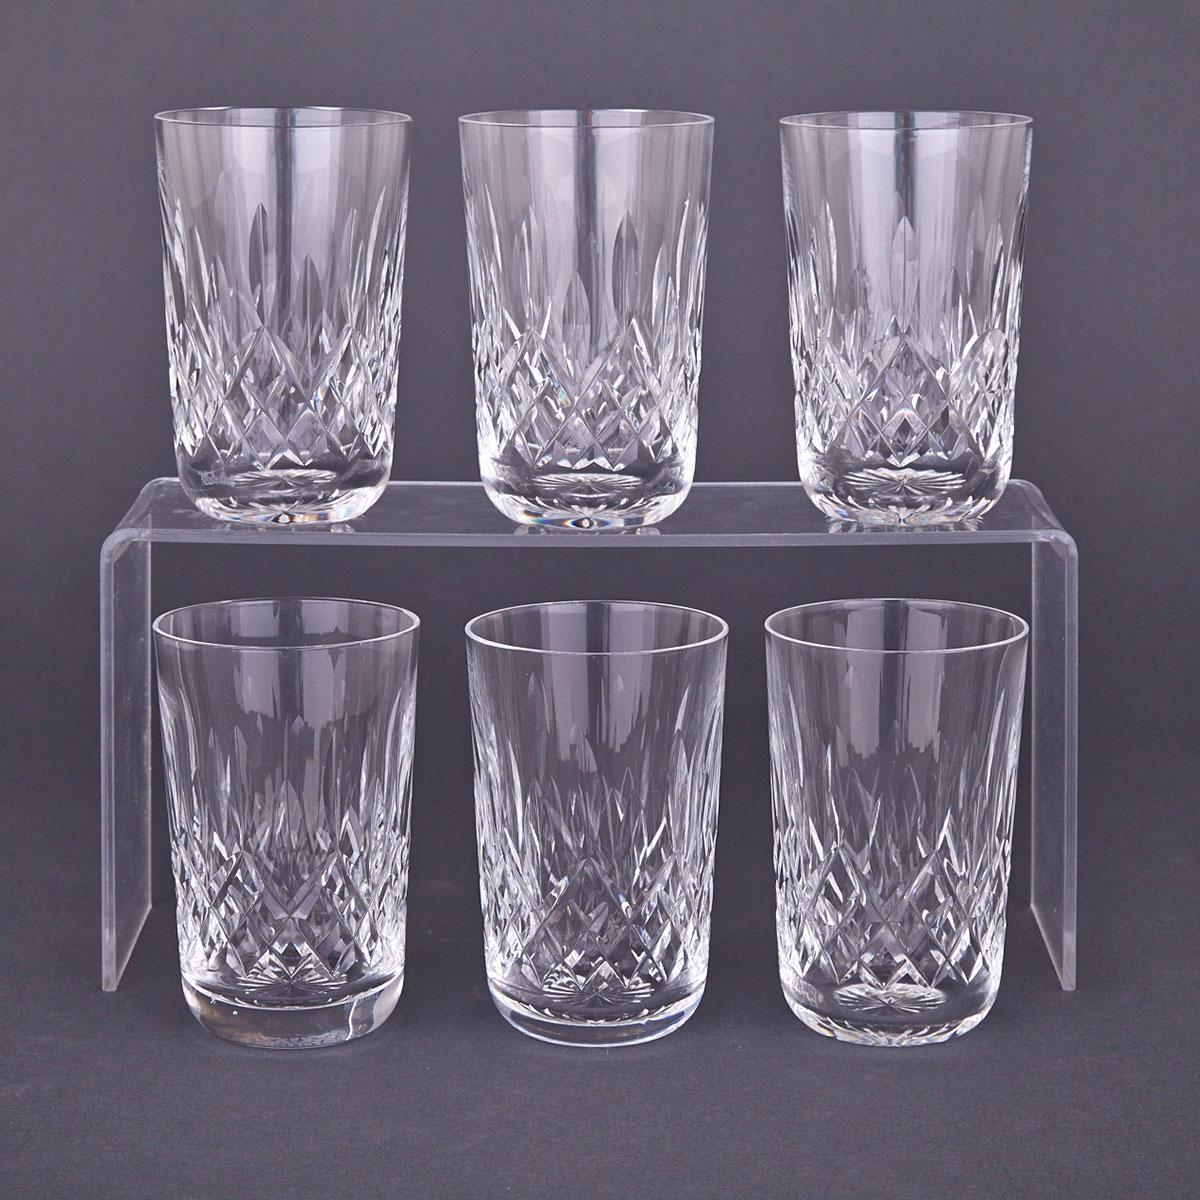 Six Waterford ‘Lismore’ Cut Glass Water Tumblers, 20th century